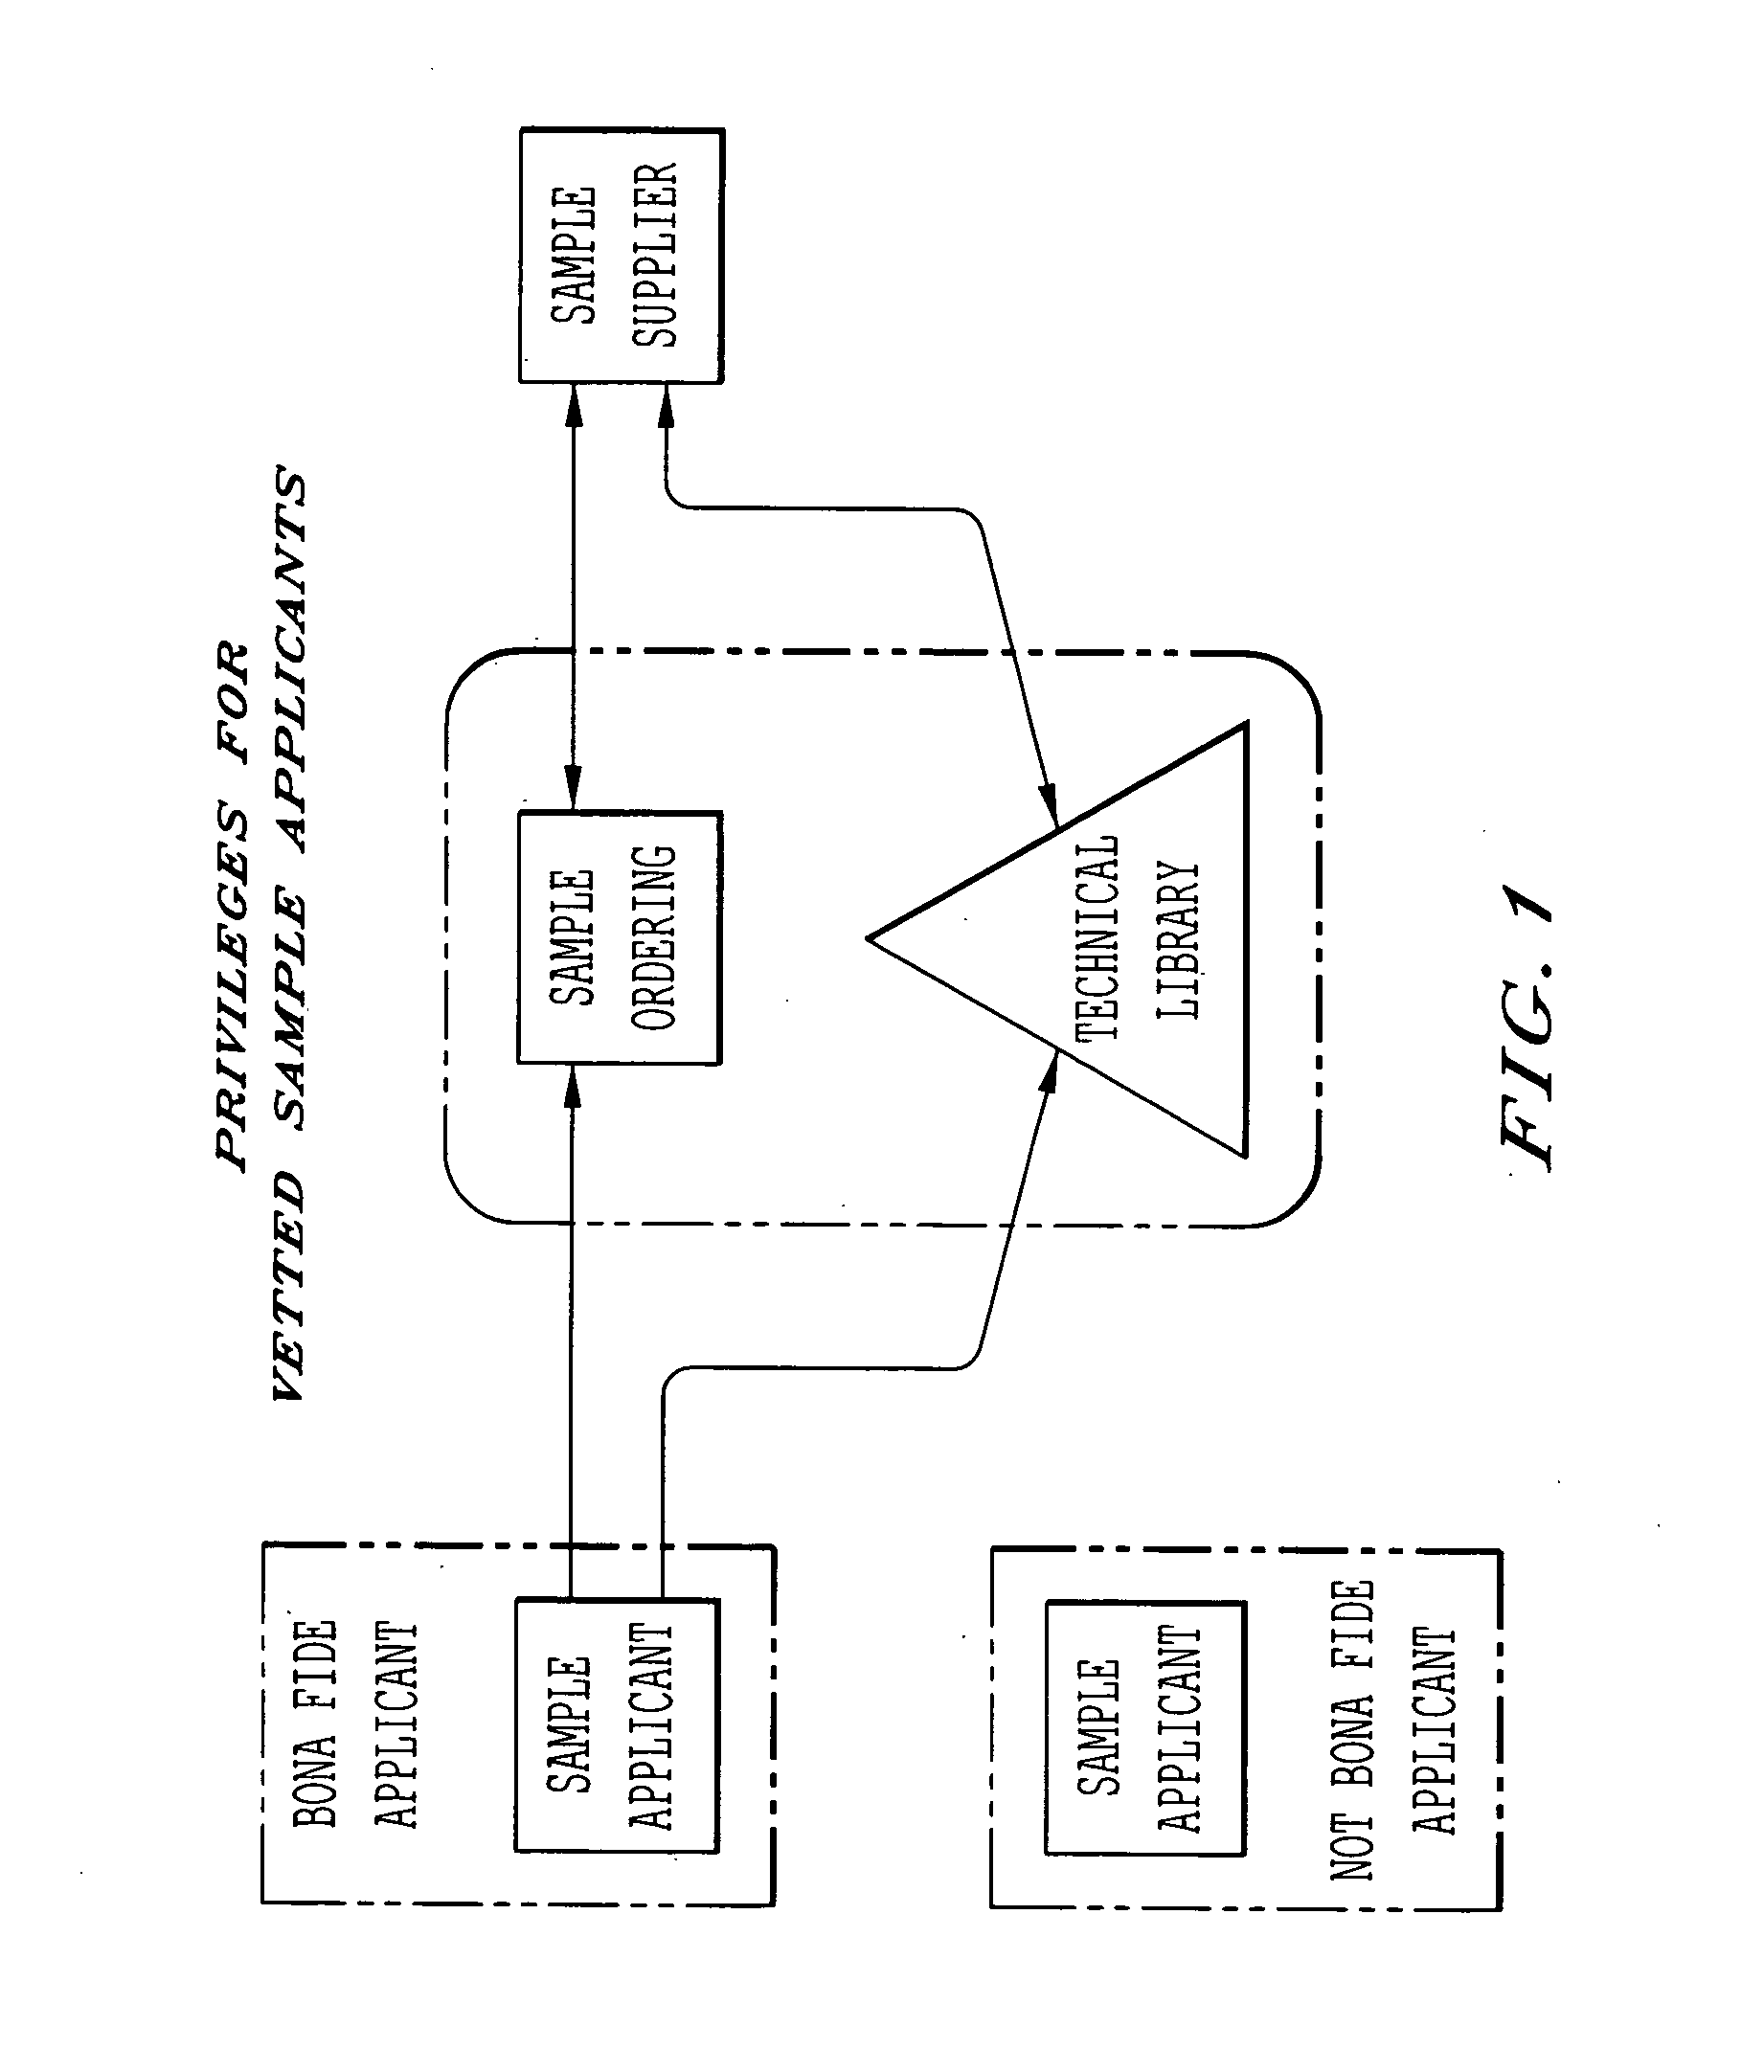 Method of sample distribution, sample tracking and integration with sales follow-up